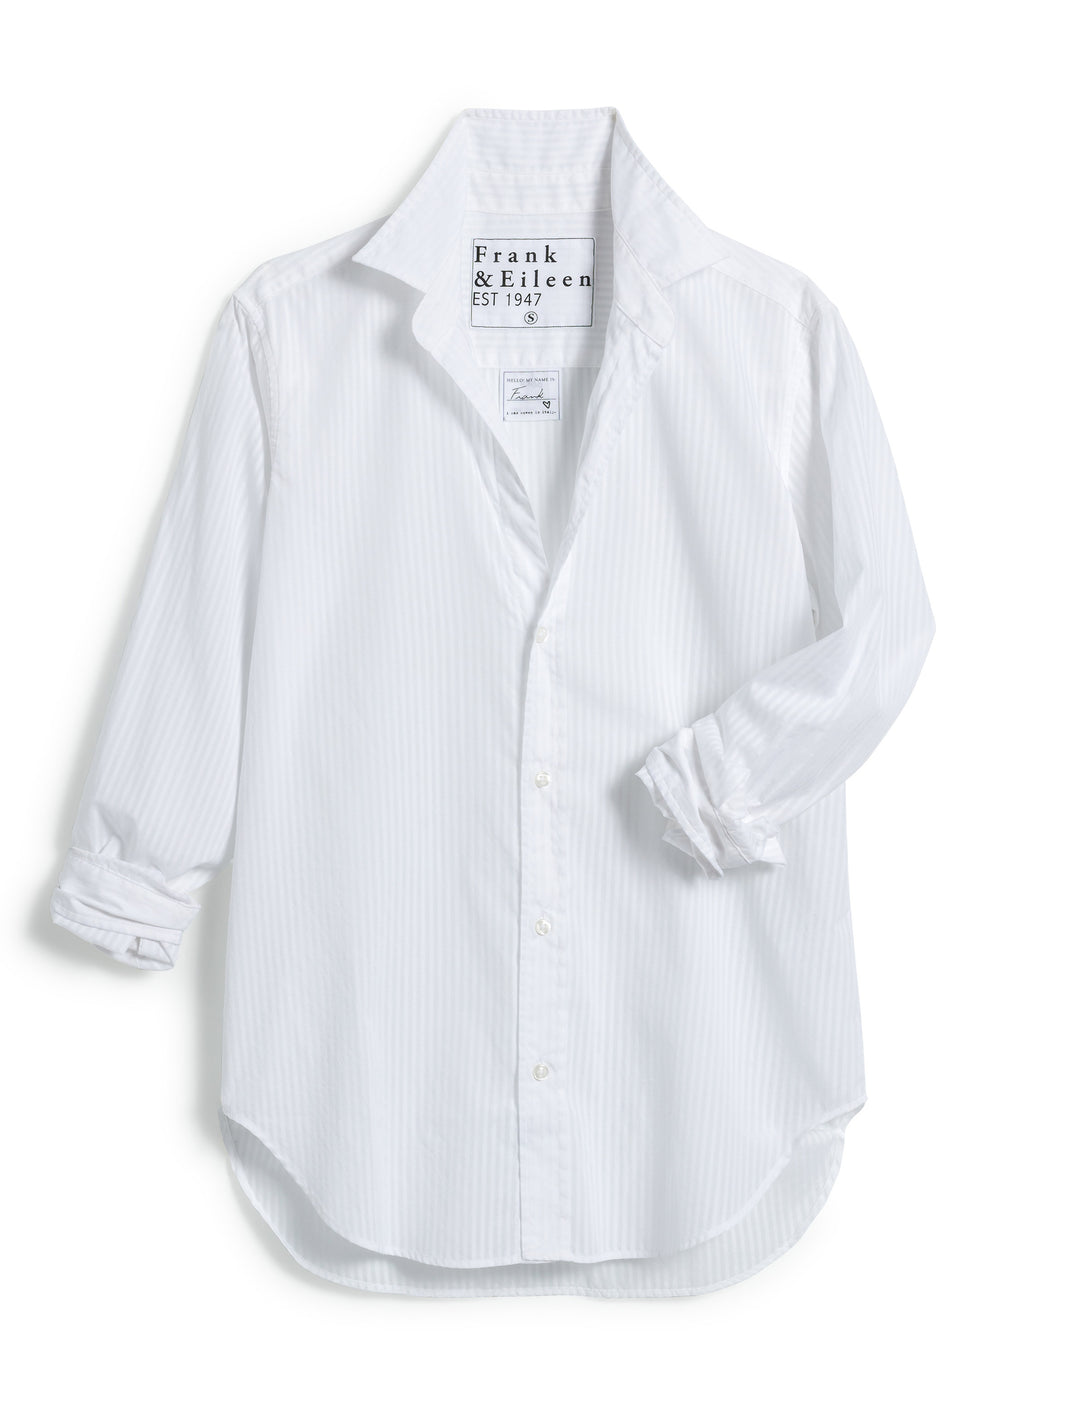 Frank & Eileen - Classic Button-Up Shirt in White on White Stripe